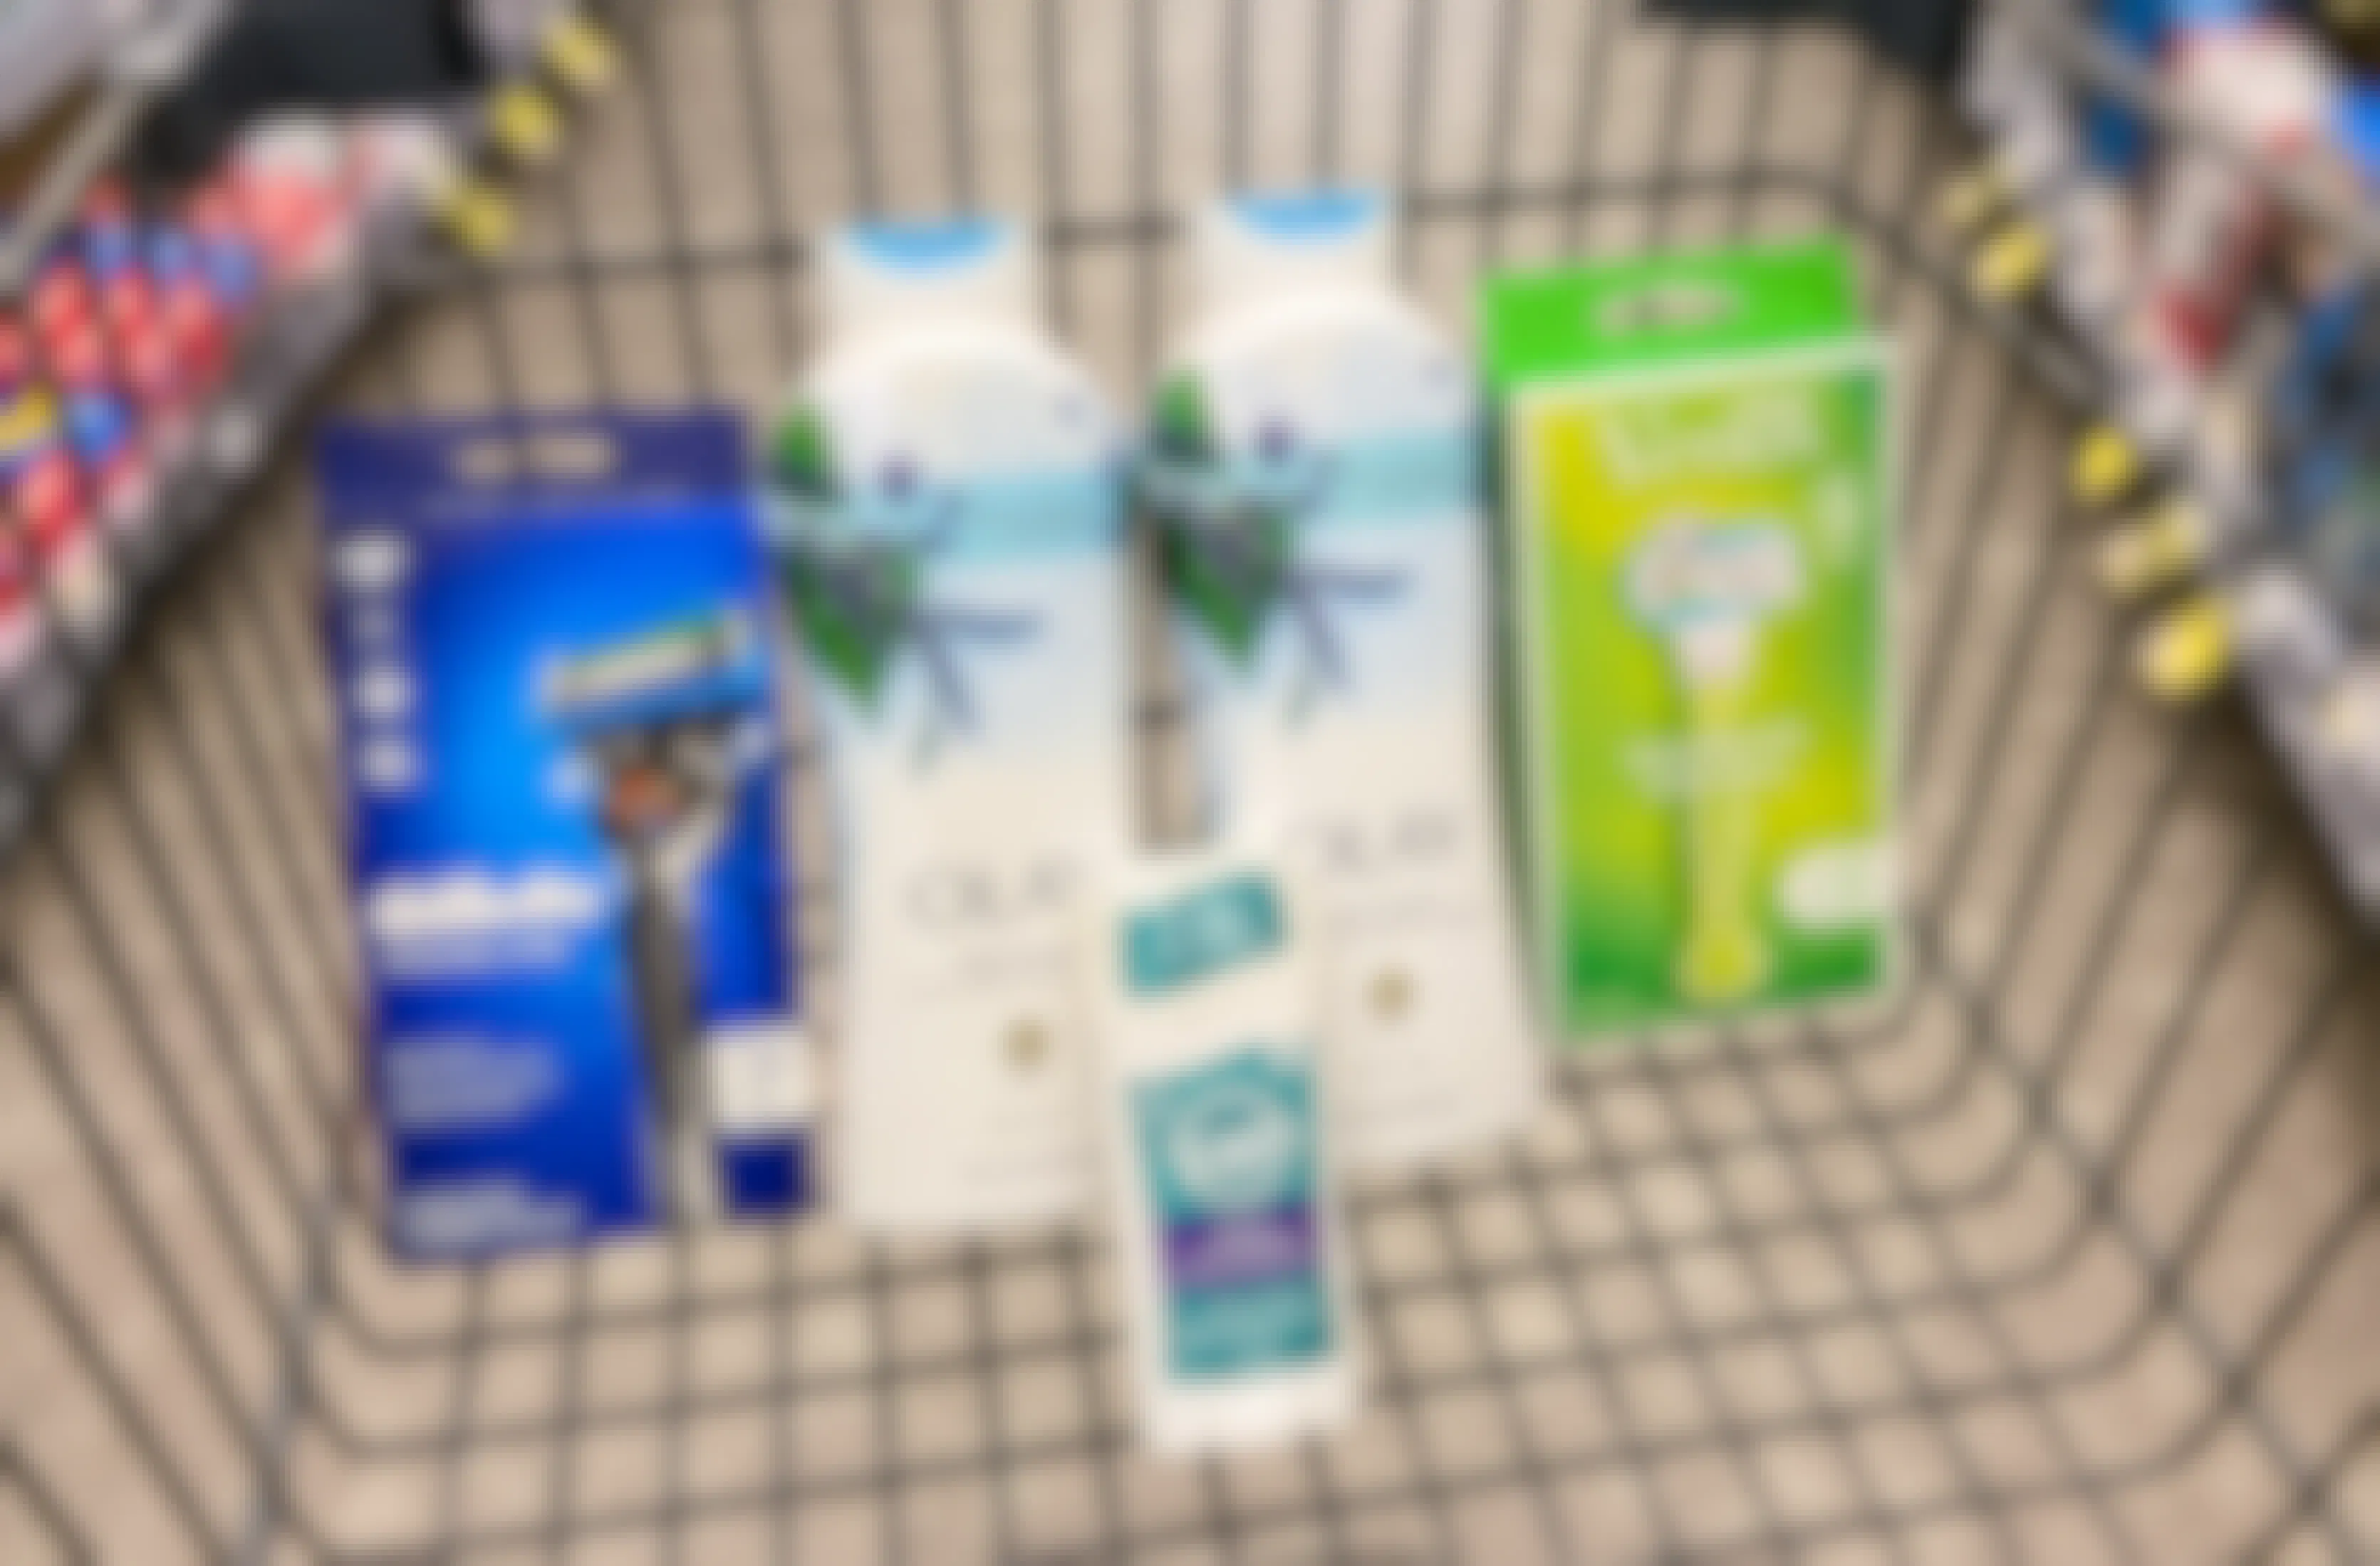 a walgreens cart with olay body wash, gillette and venus razors, and tom's deodorant